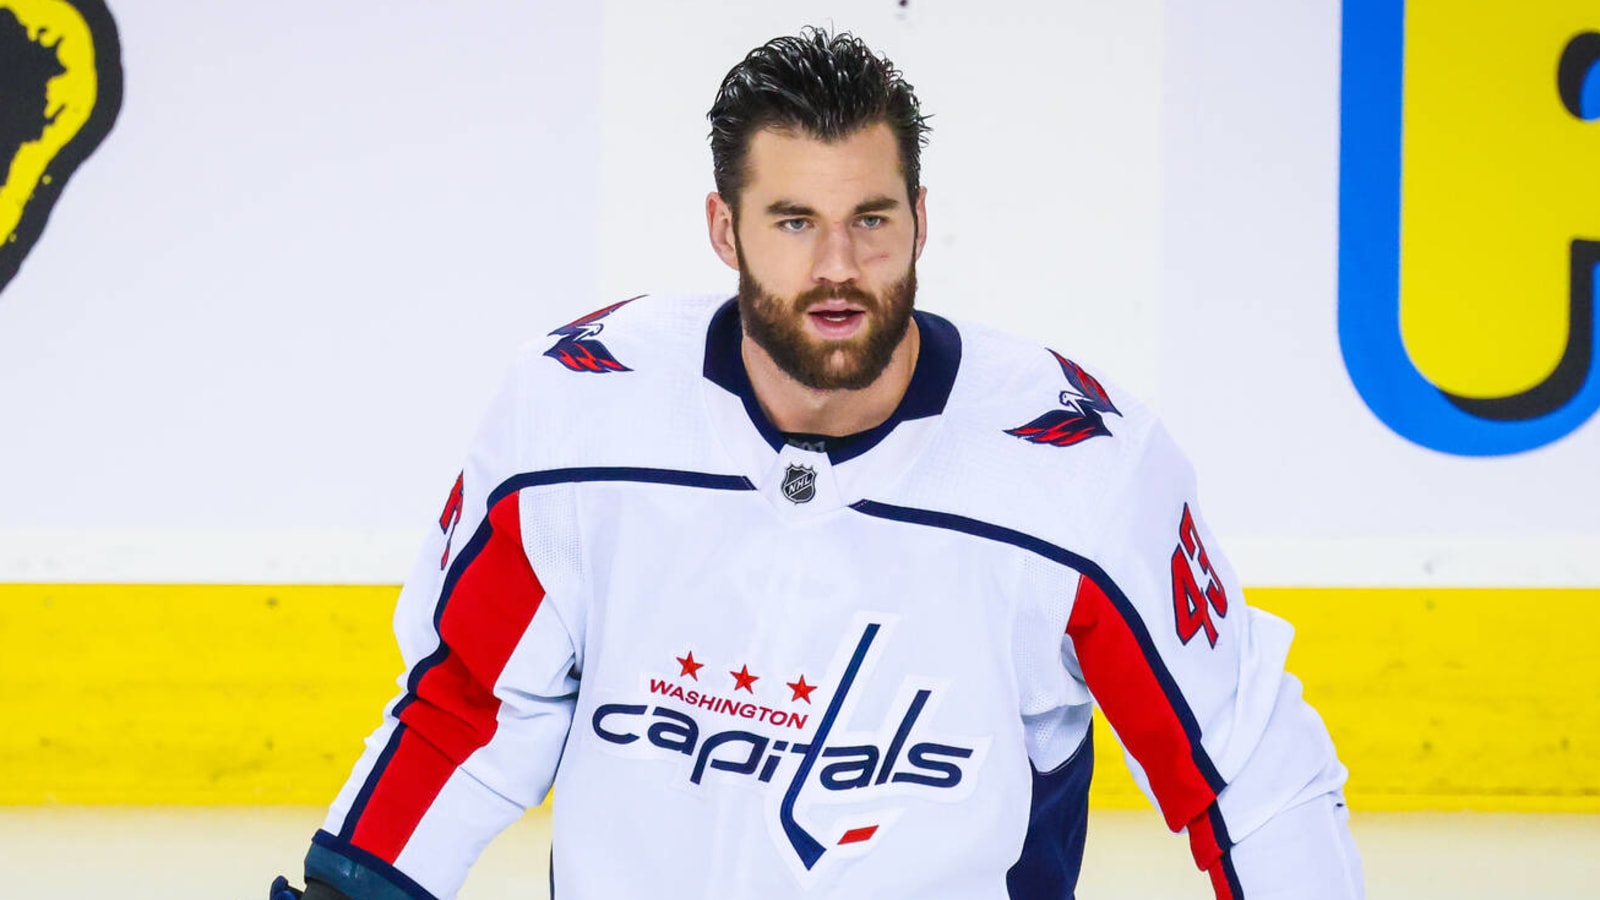 Capitals winger suspended six games for high-sticking